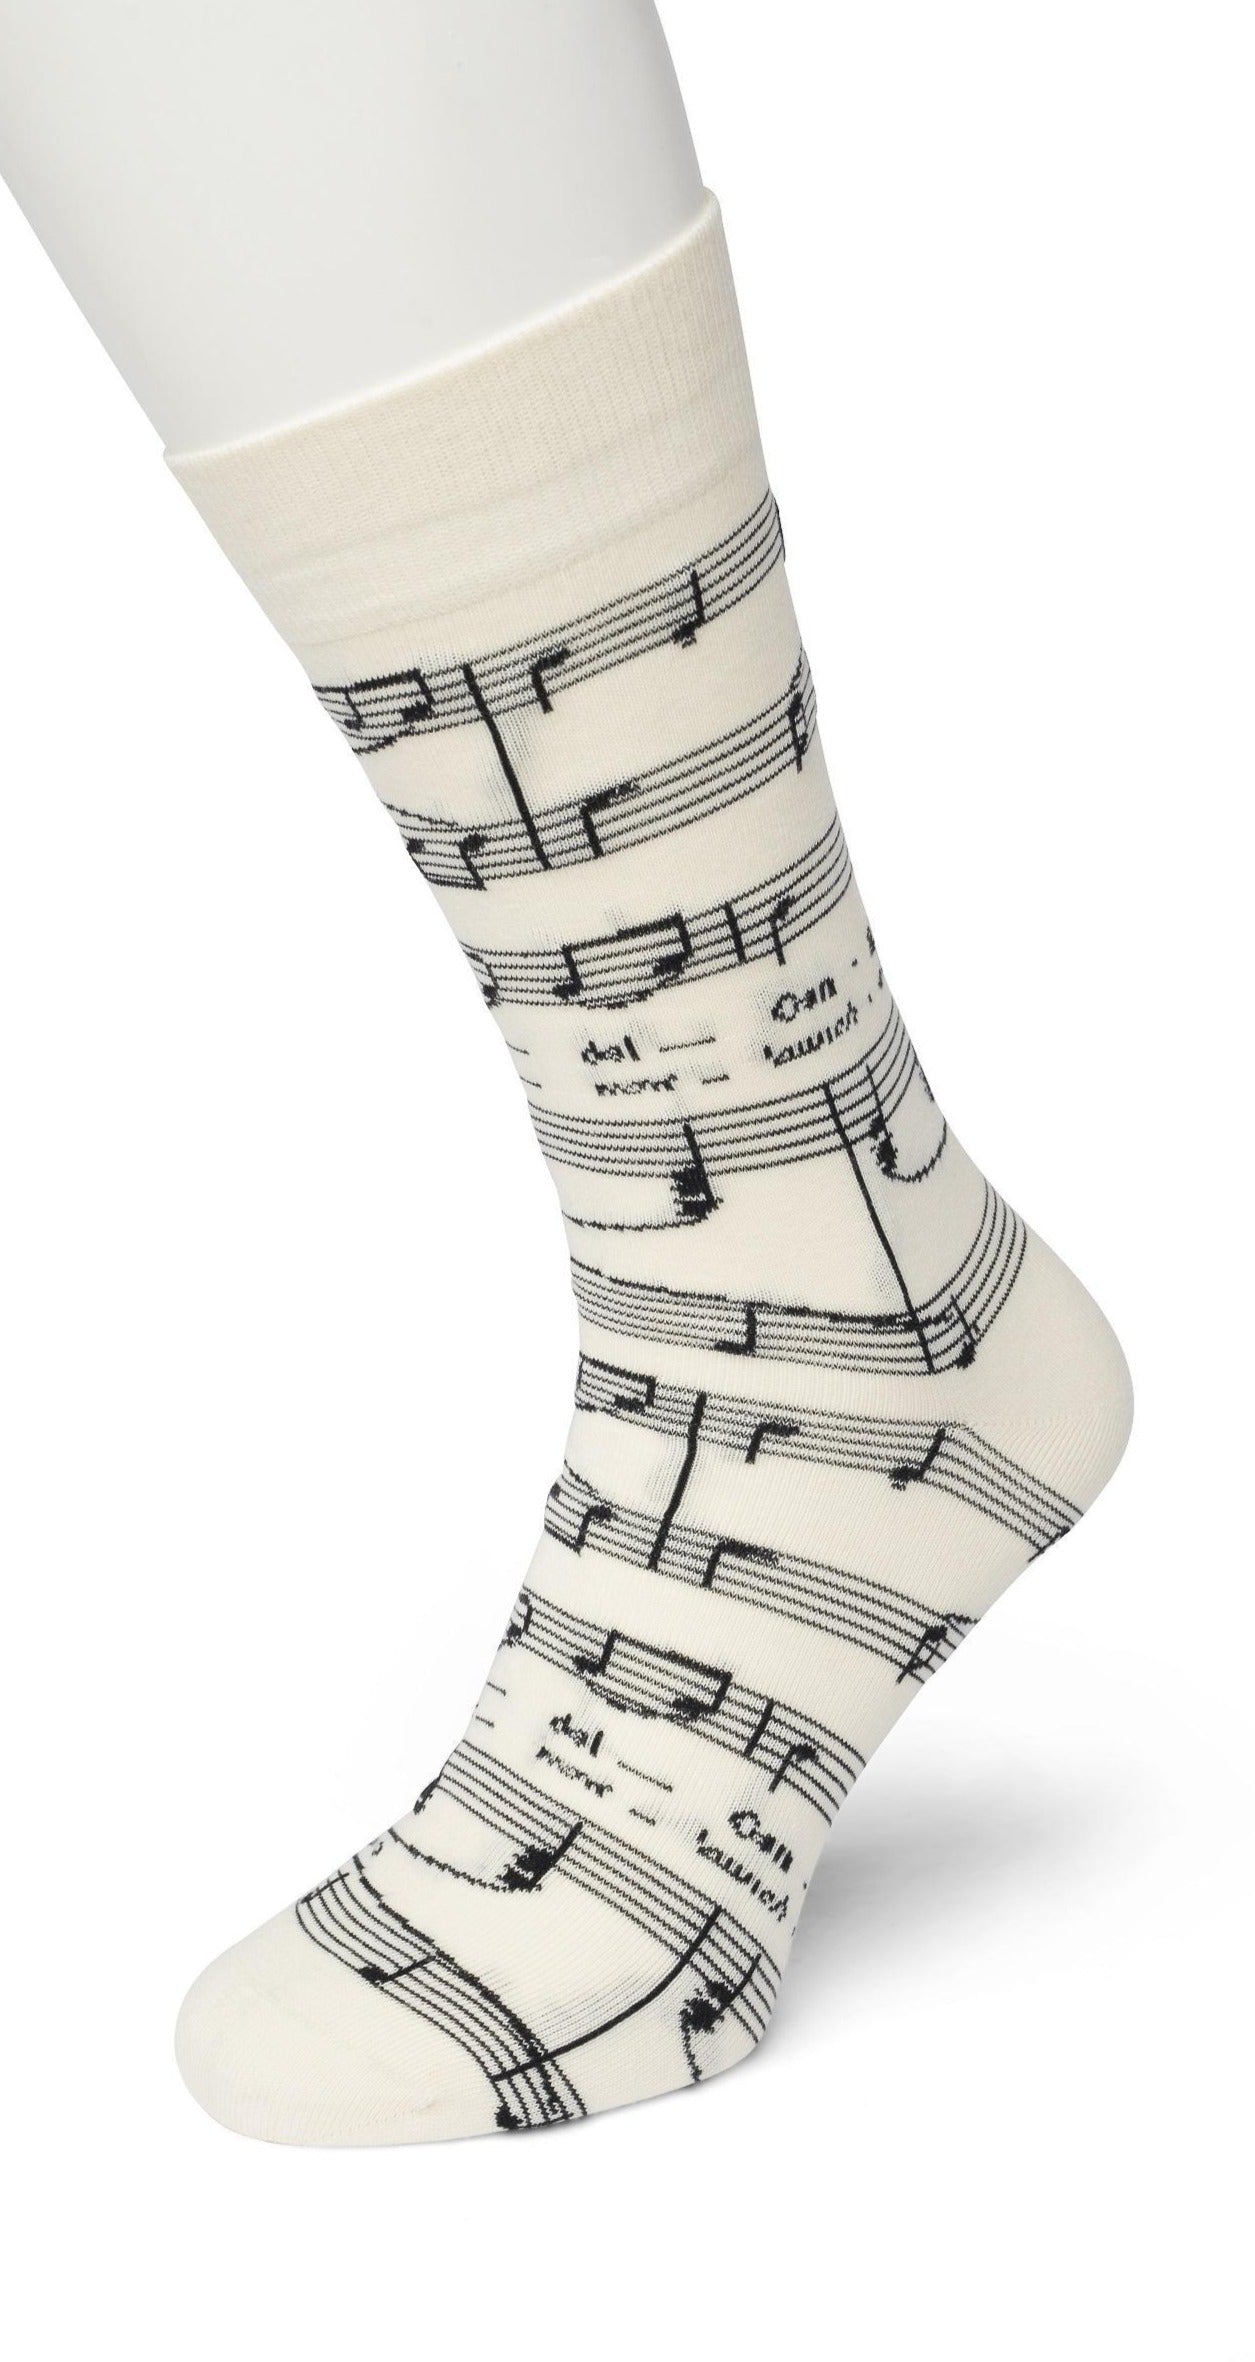 Bonnie Doon Brillante Sock - Off white cotton mix ankle socks with a woven black music notes pattern. Available in men and women's sizes